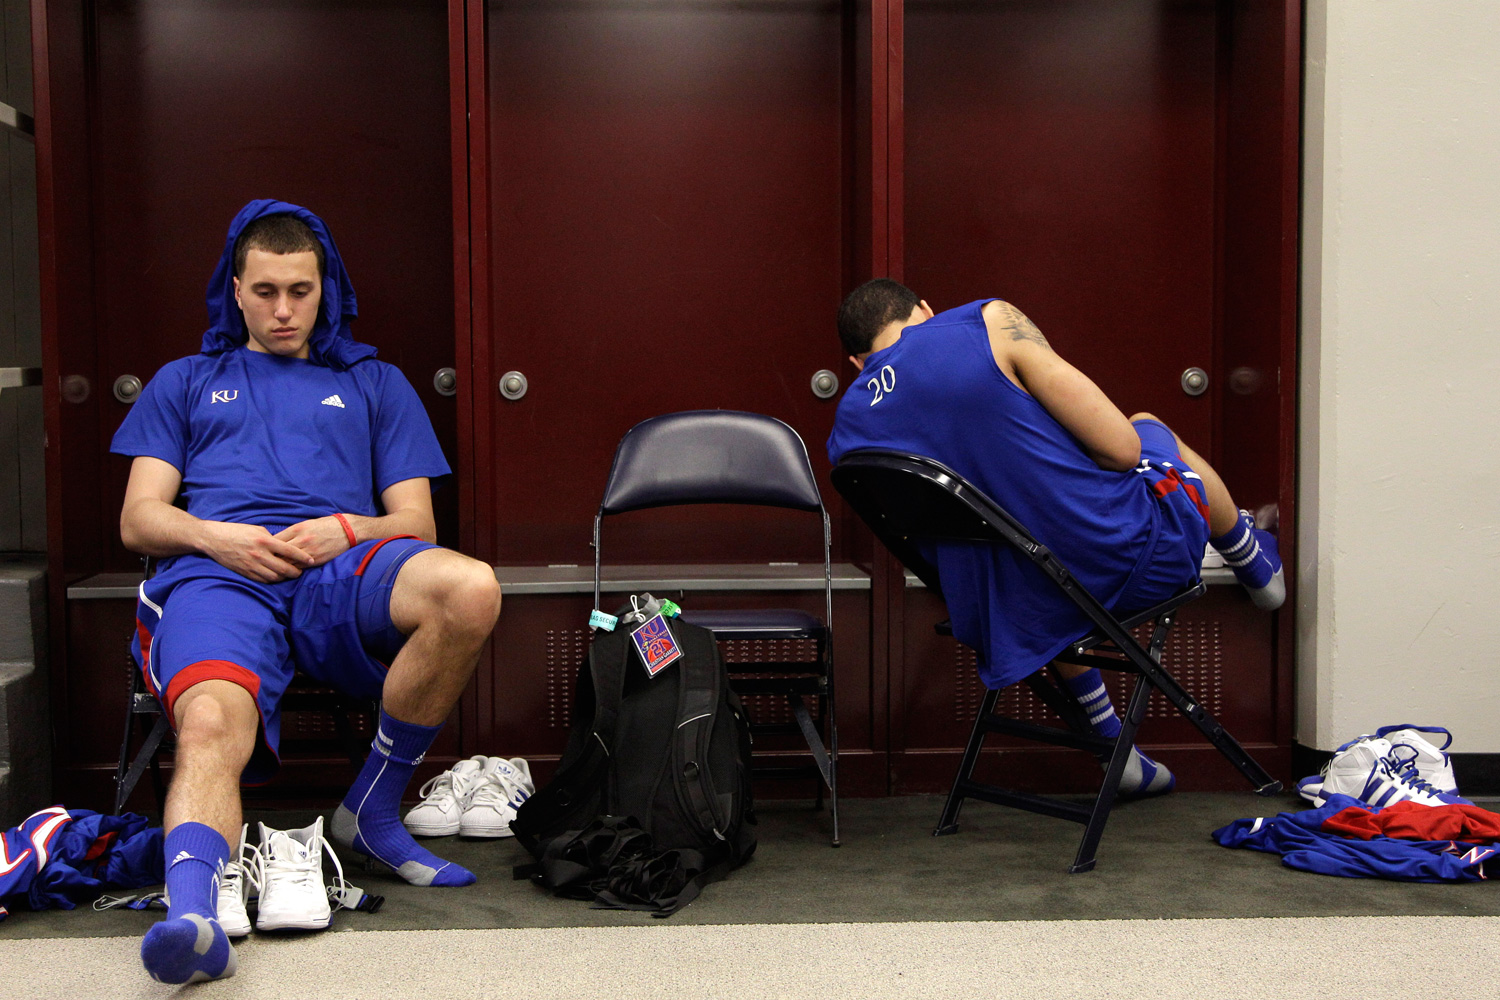 April 2, 2012. Kansas guard Christian Garrett, left, and guard Niko Roberts (20) react in the locker room after their 67-59 loss to Kentucky in the NCAA Final Four tournament college basketball championship game in New Orleans.